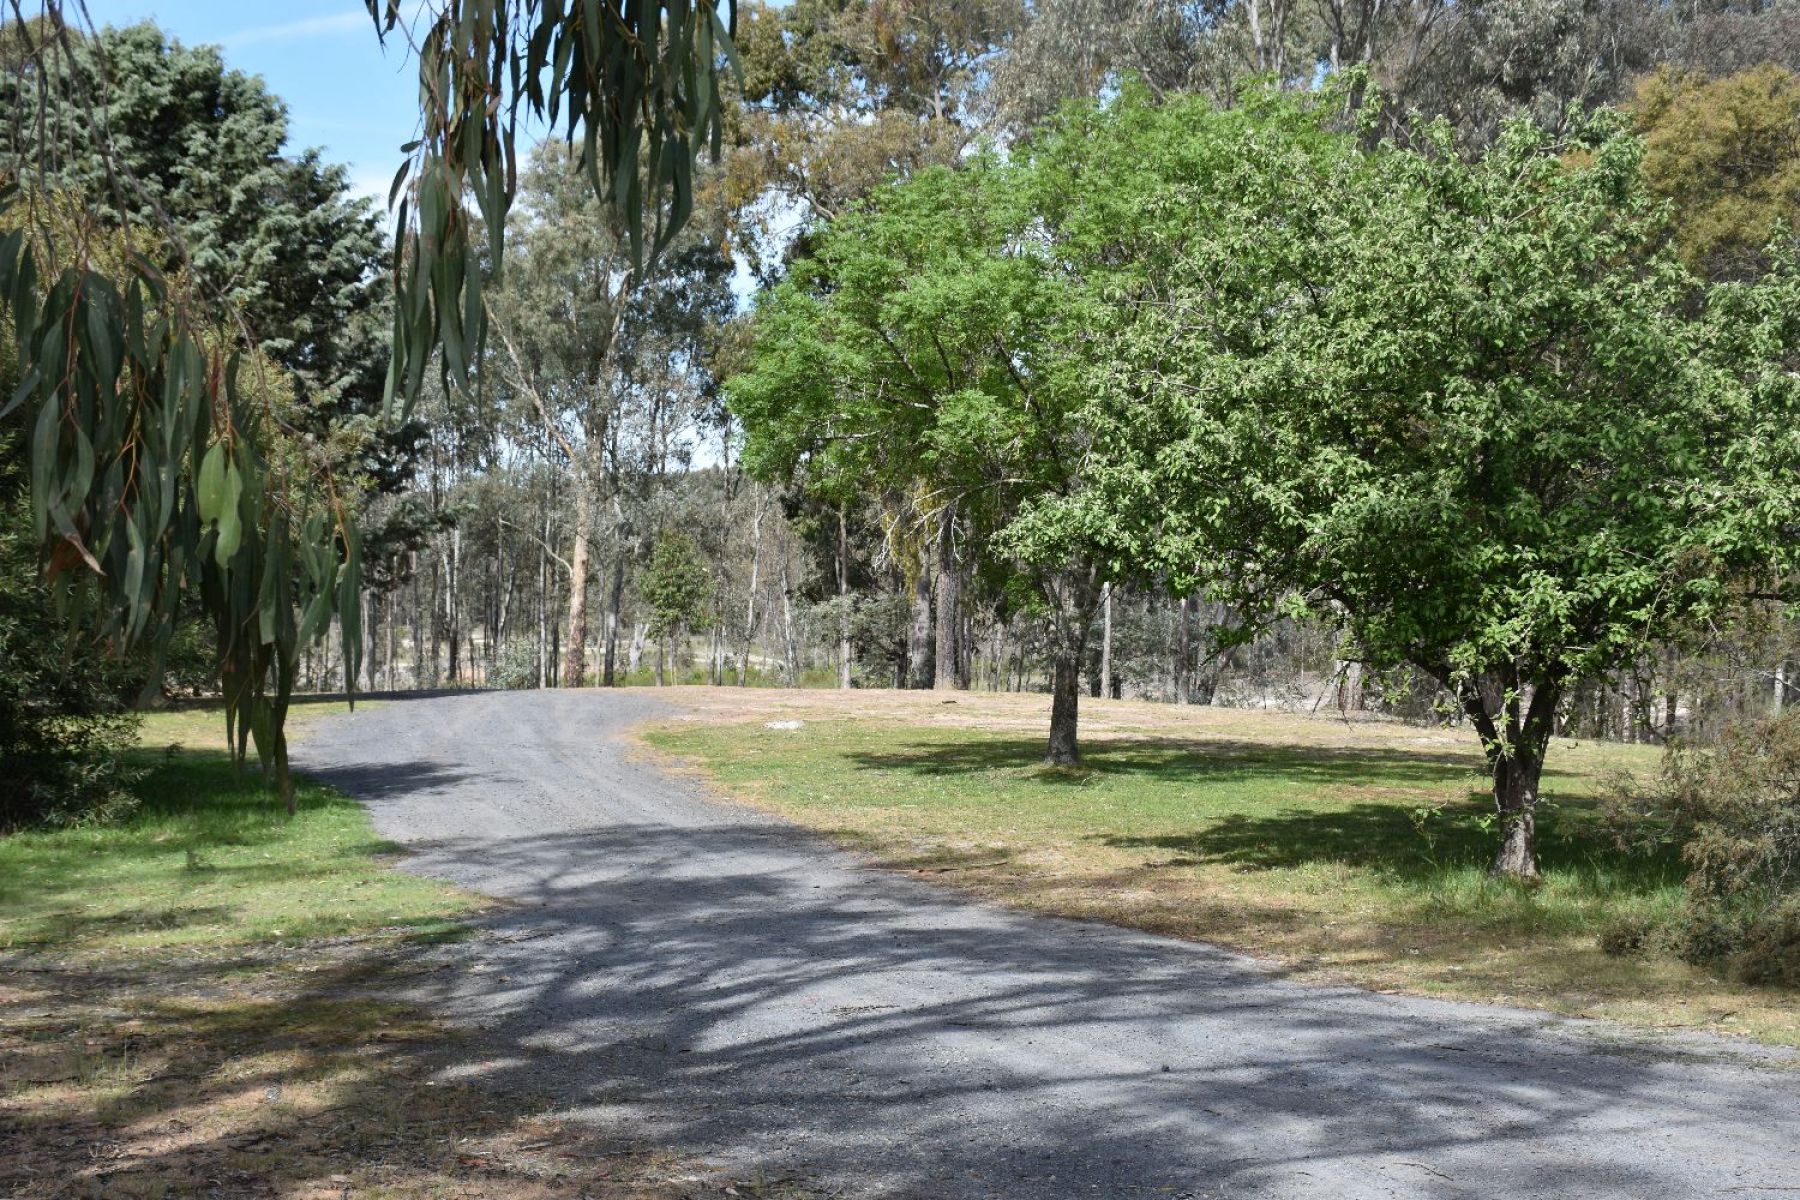 A gravel track leading into the campsite with lots of trees providing shade